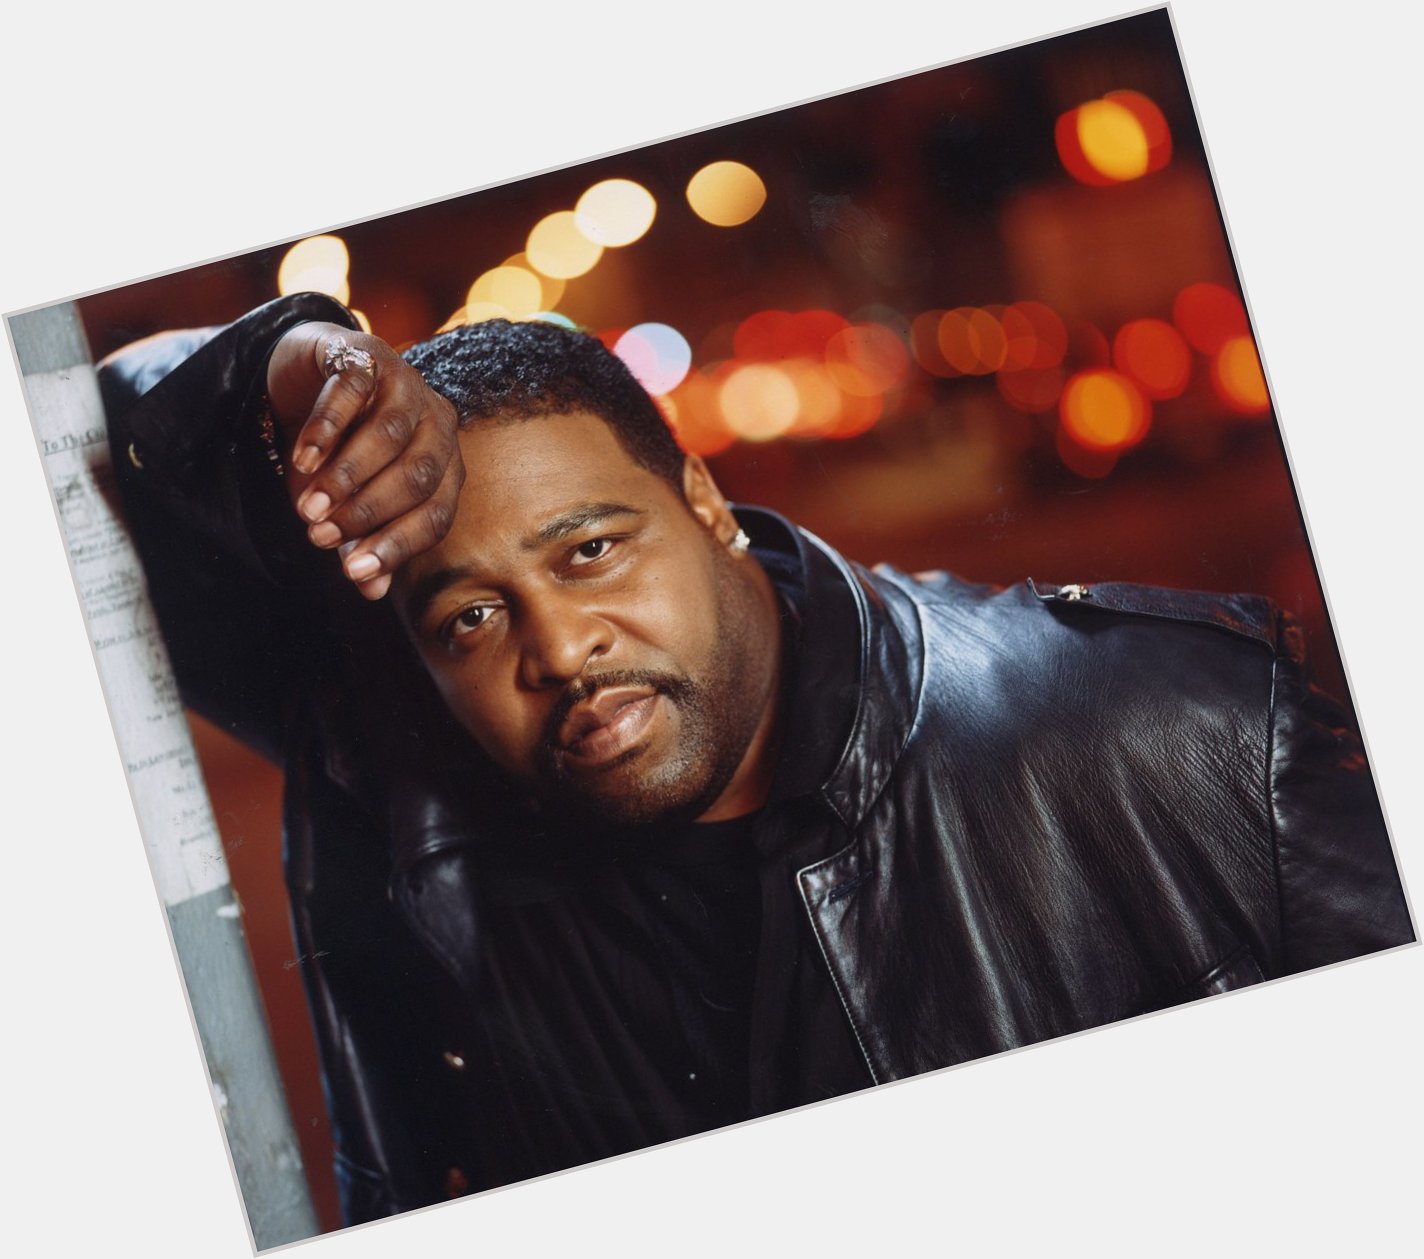 Happy Birthday to the late great Gerald Levert. He would have been 52 today. 